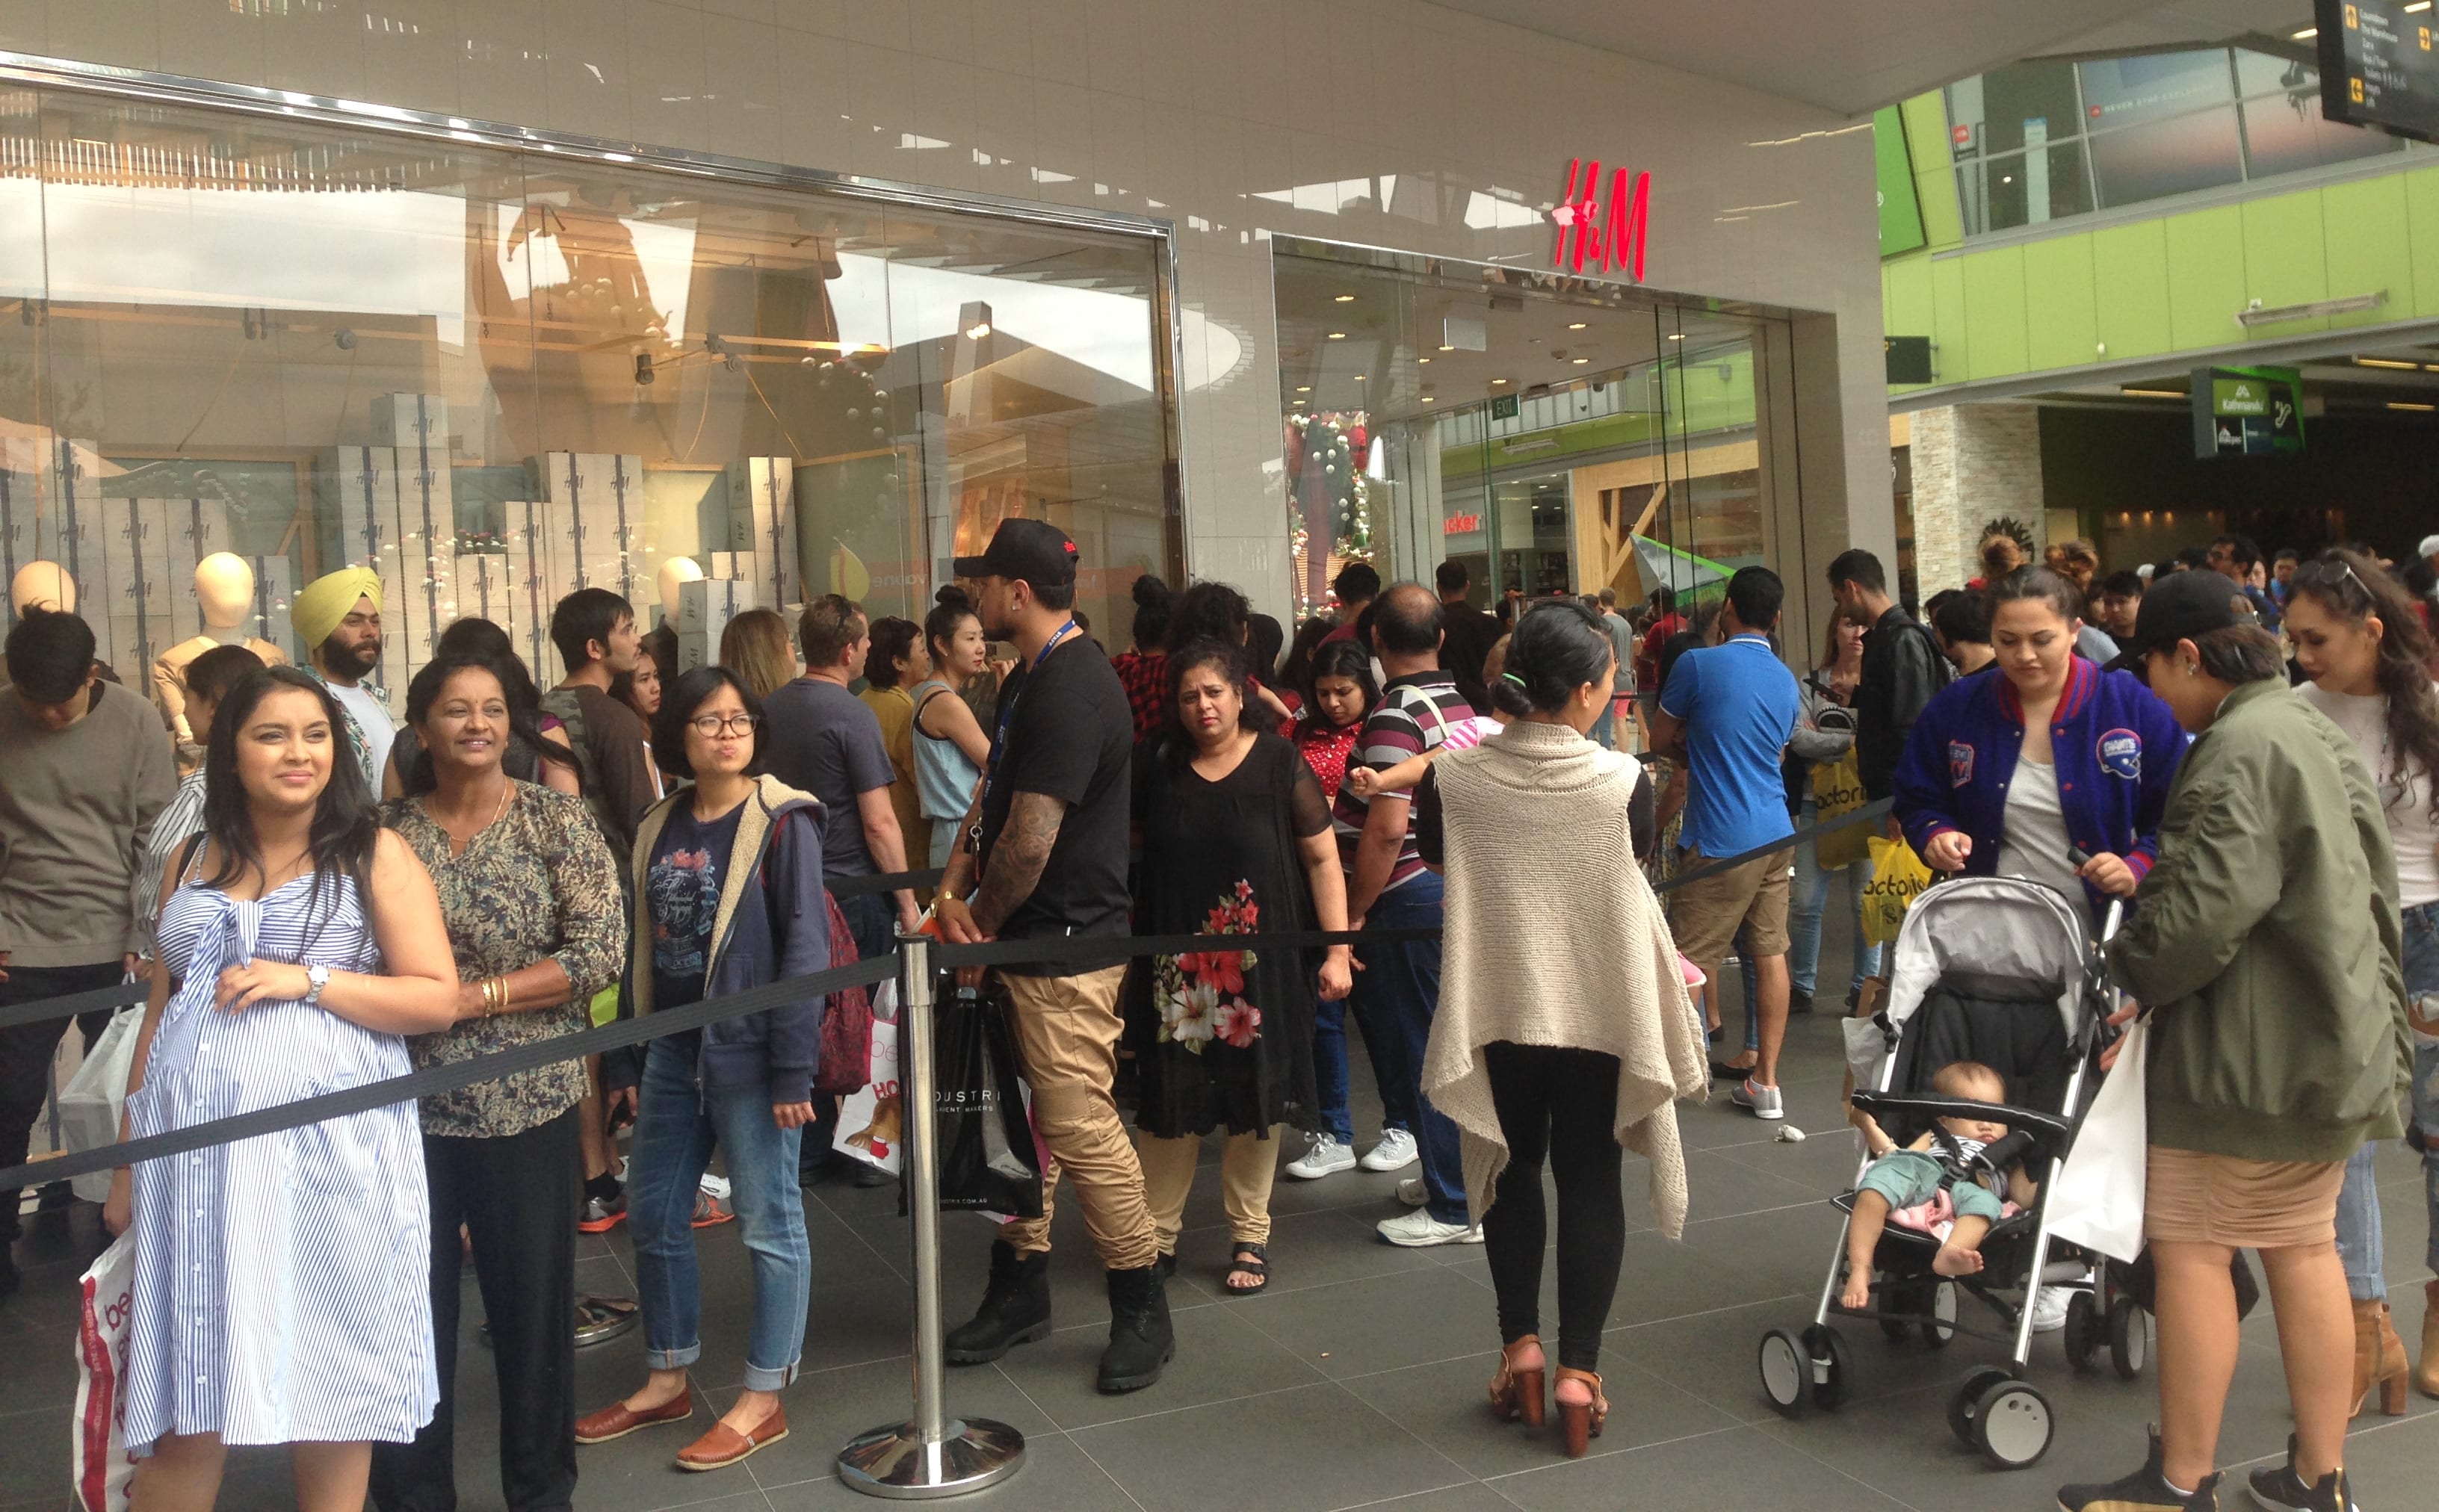 Long queues of shoppers waited to get into clothing retailer H & M at Auckland's Sylvia Park Mall.